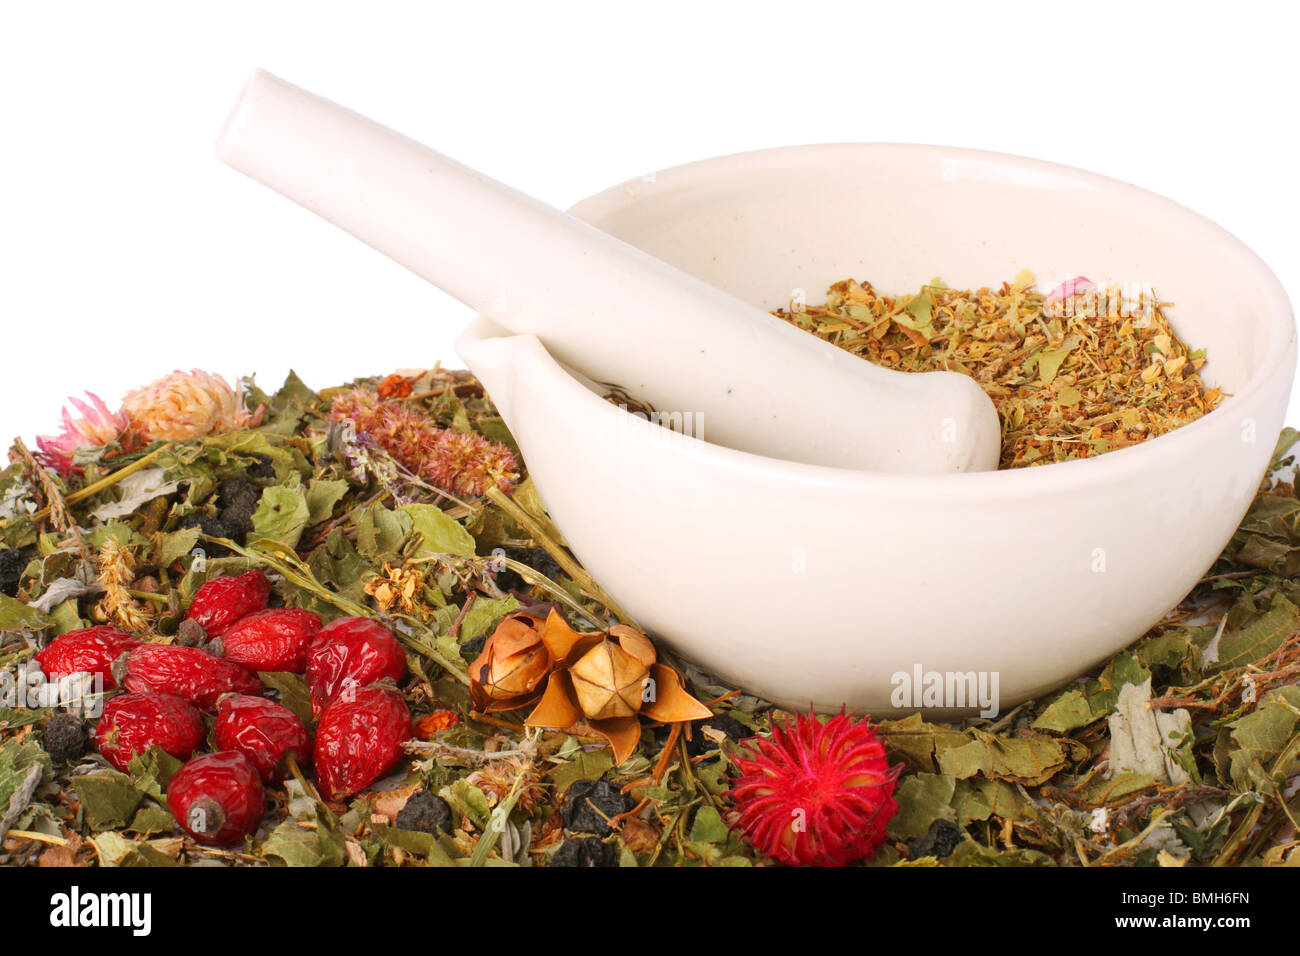 Mortar with dry herbs and hips, isolated on white background Stock Photo